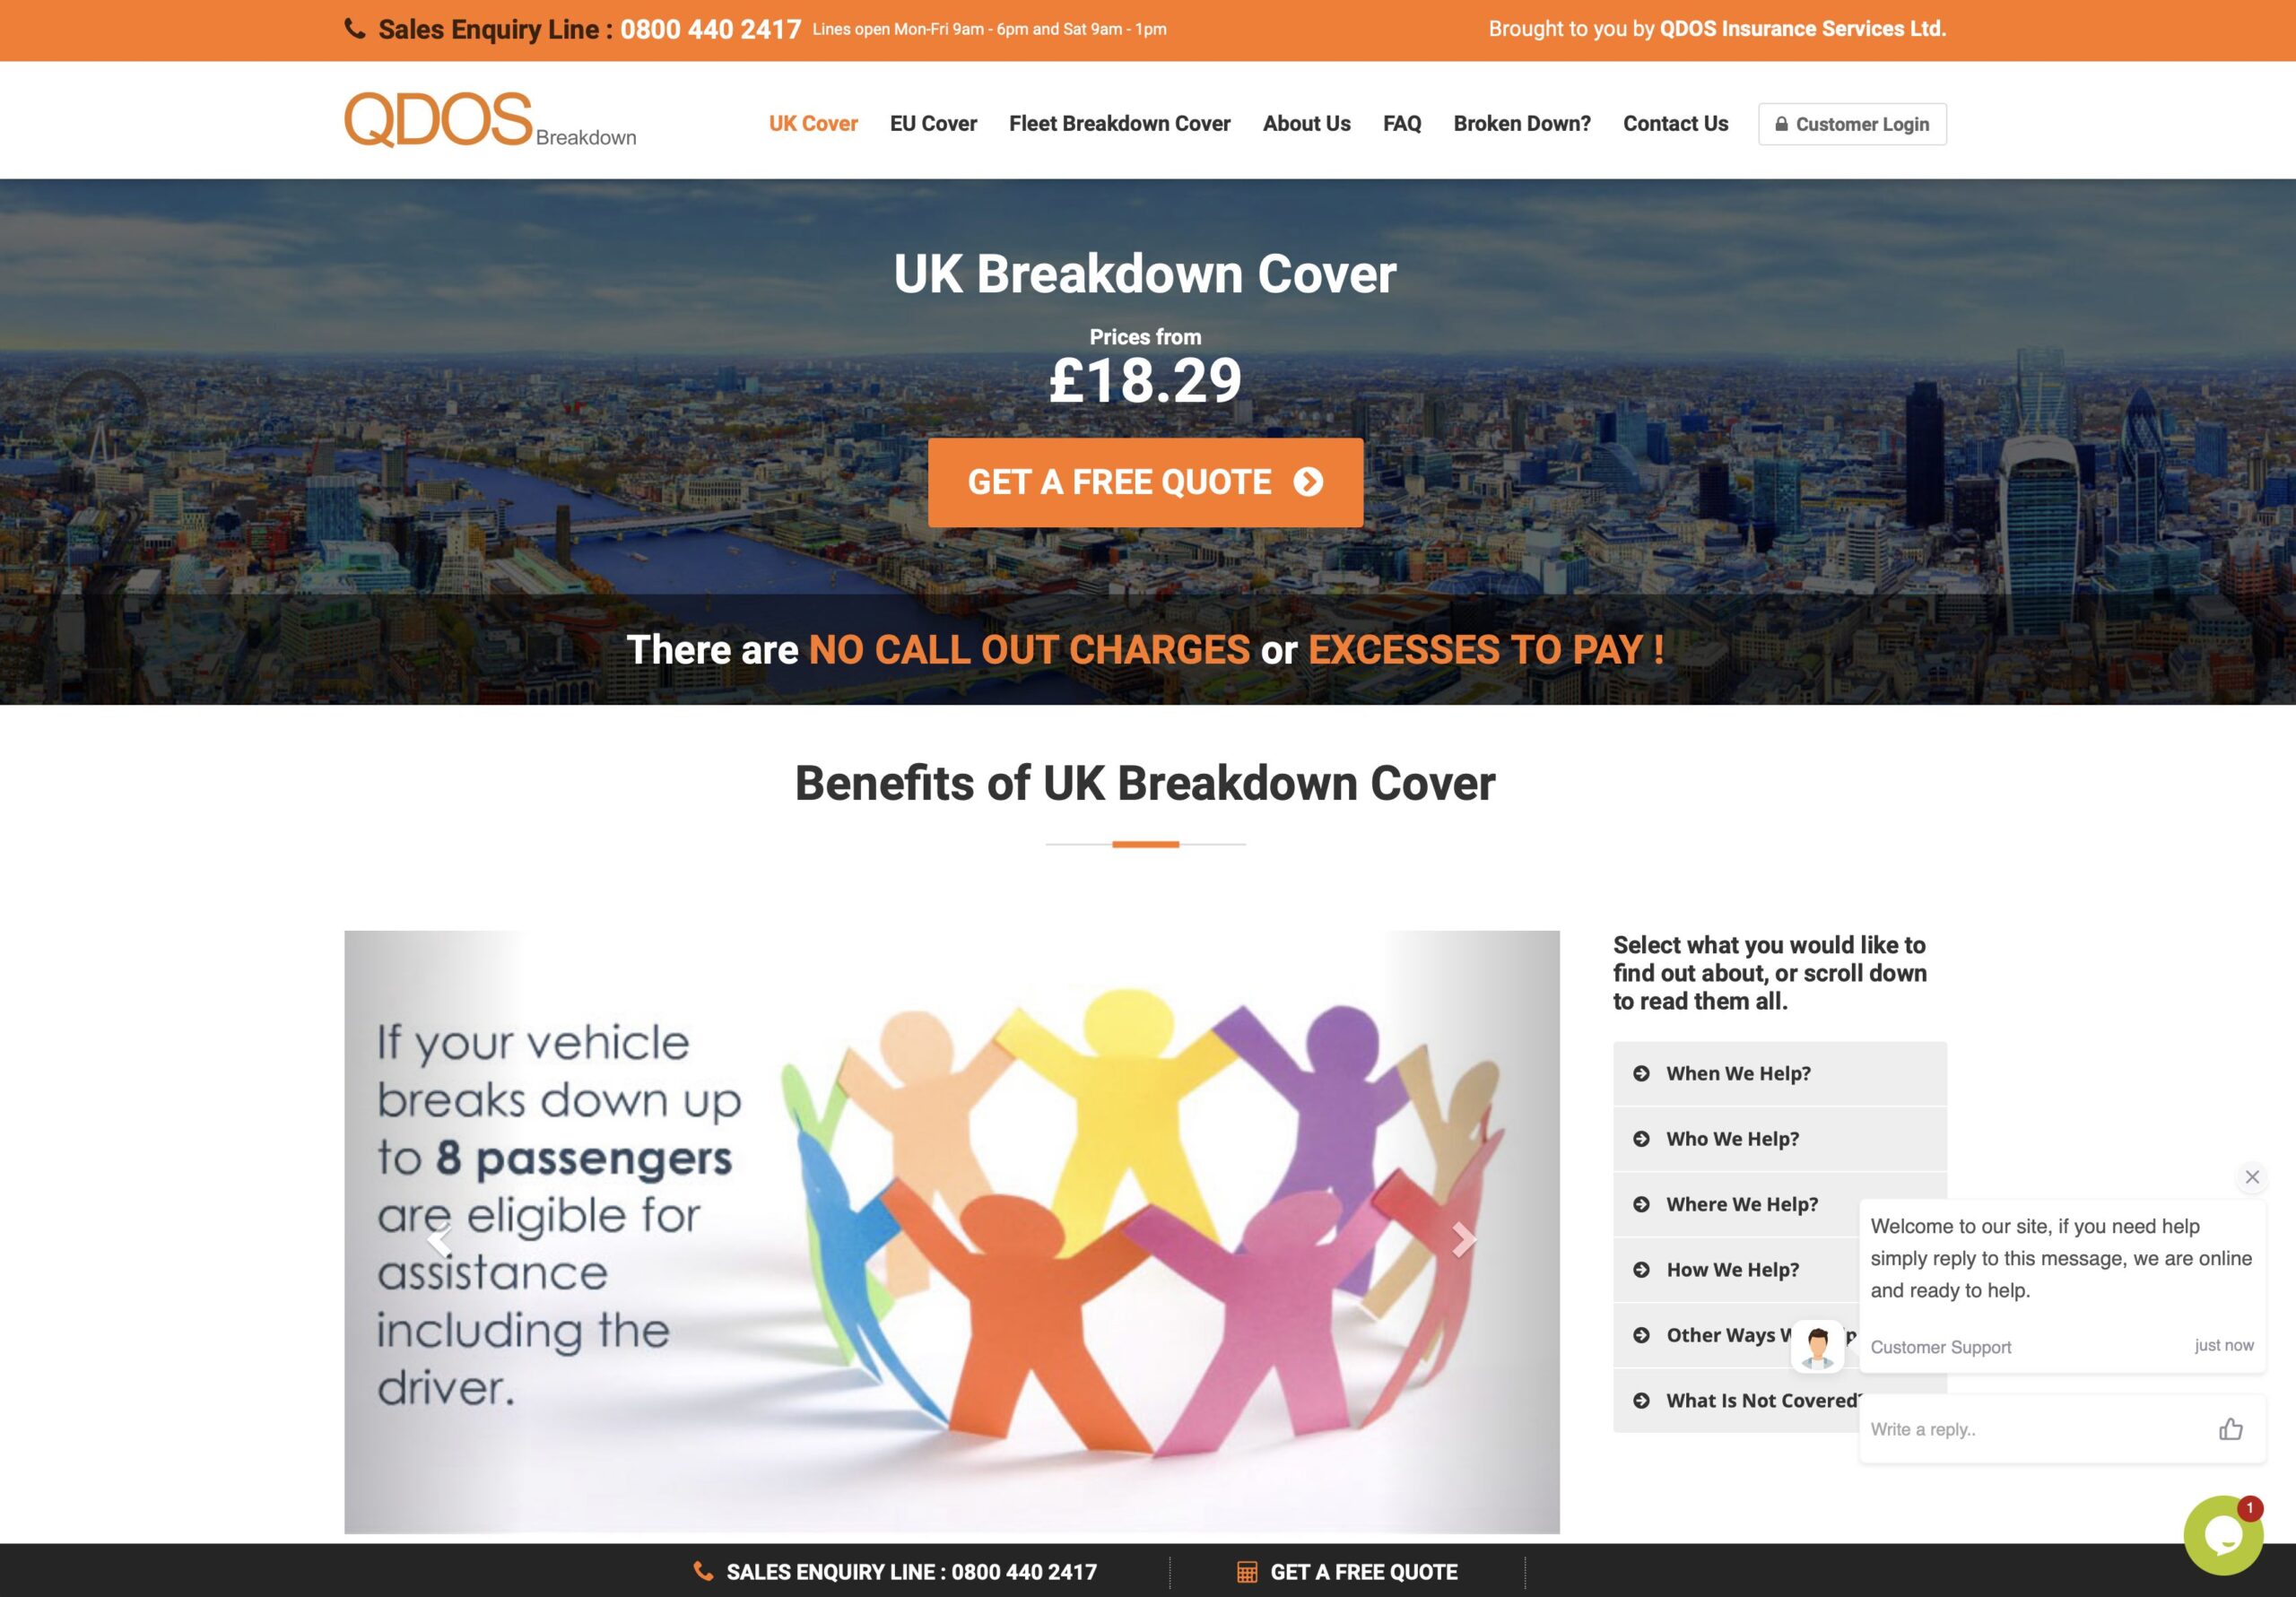 qdos breakdown cover page